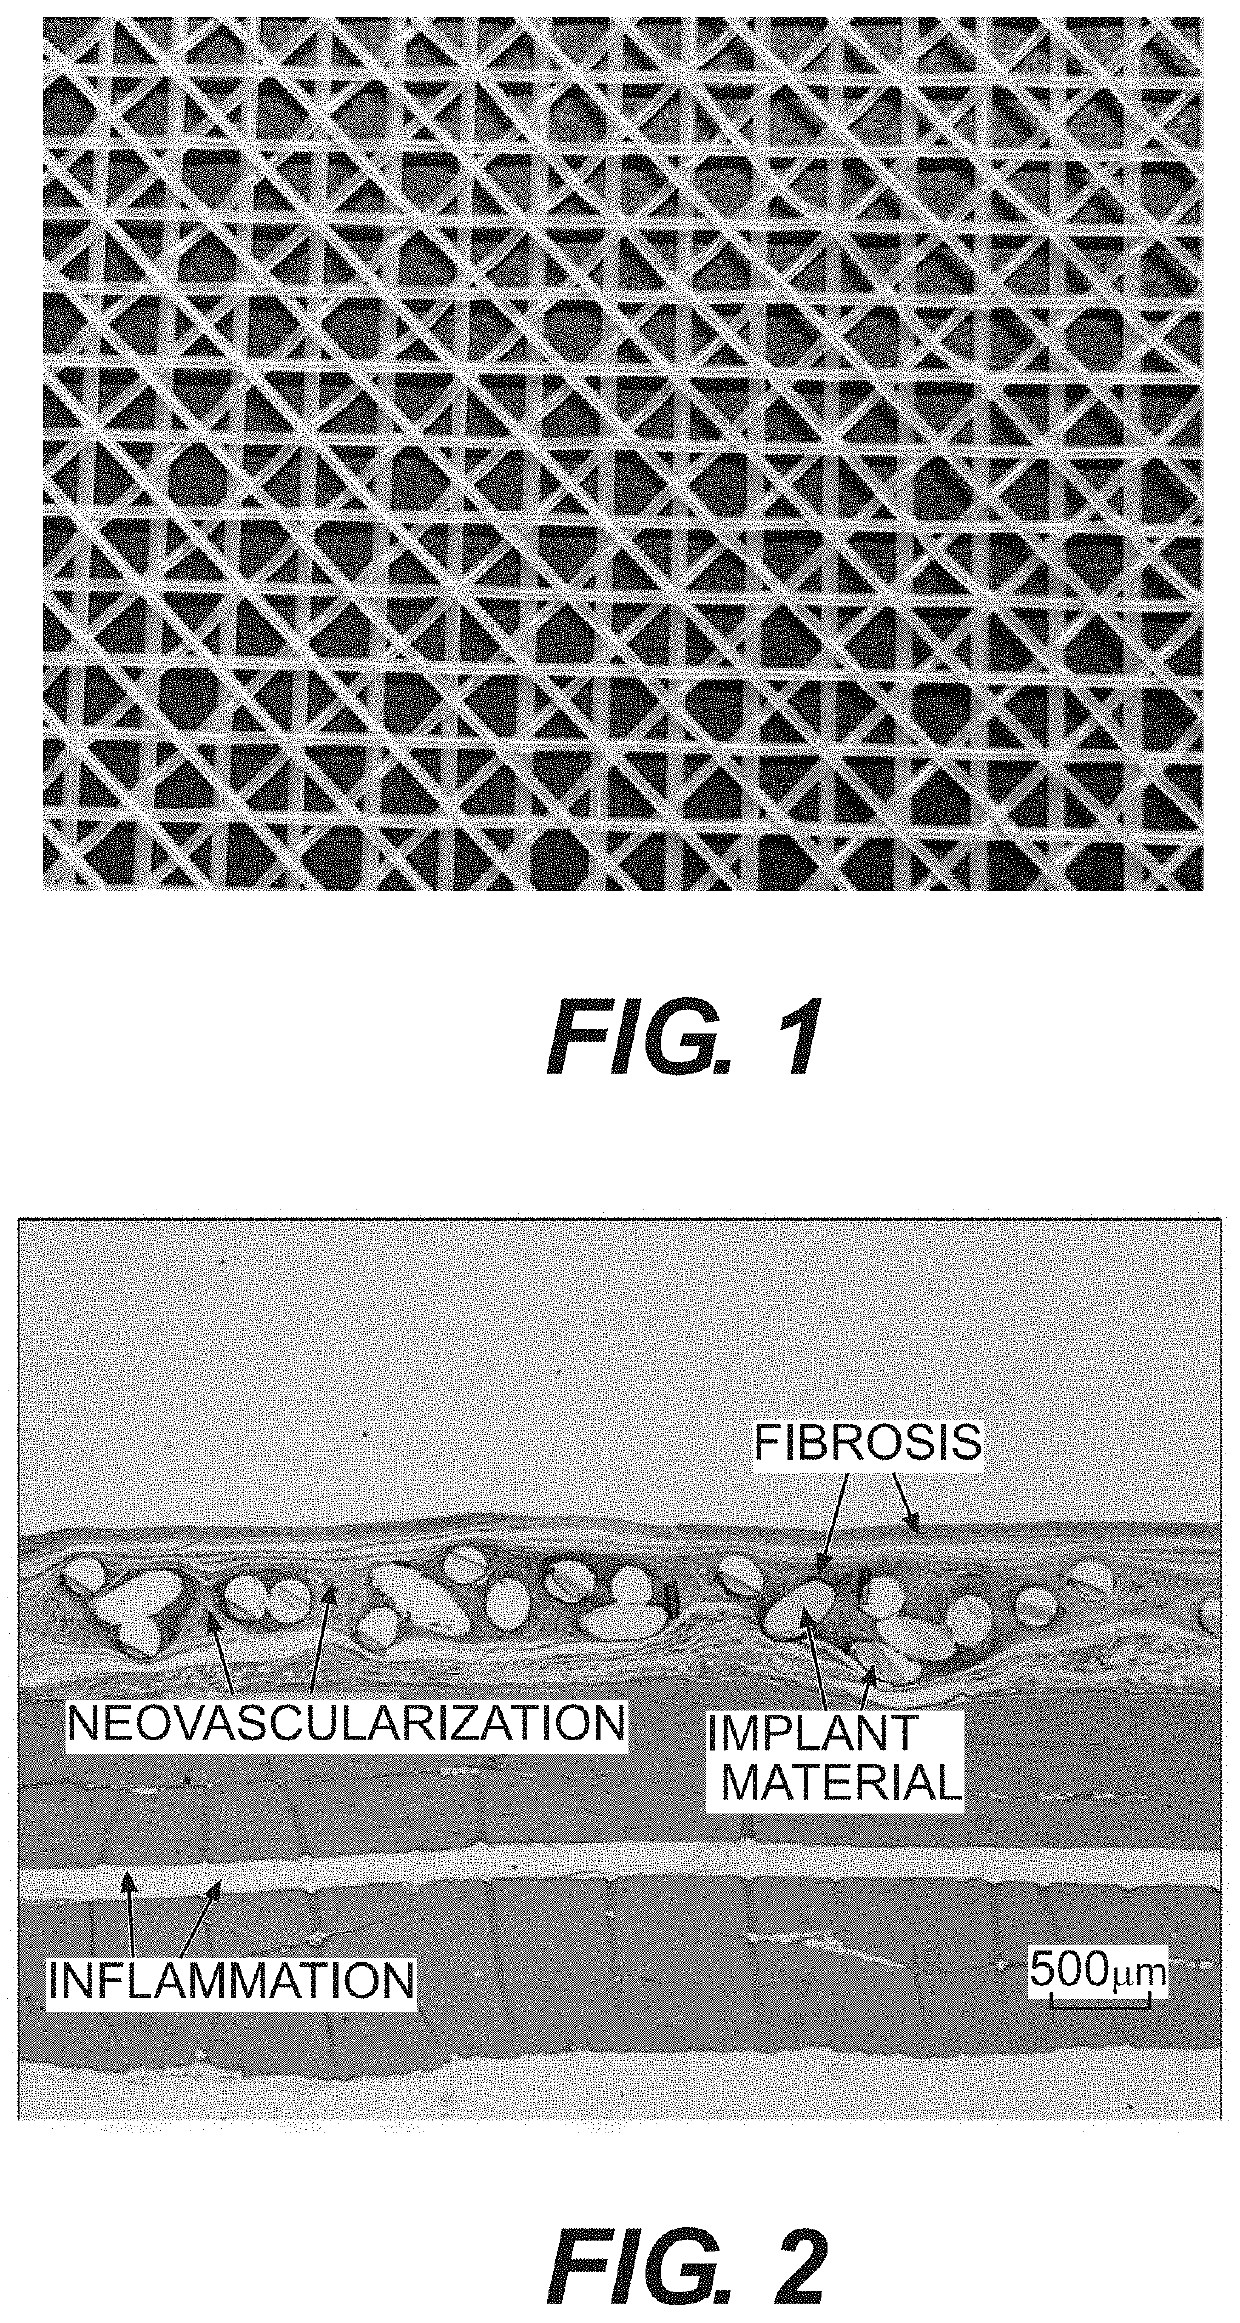 Medical devices containing poly(butylene succinate) and copolymers thereof